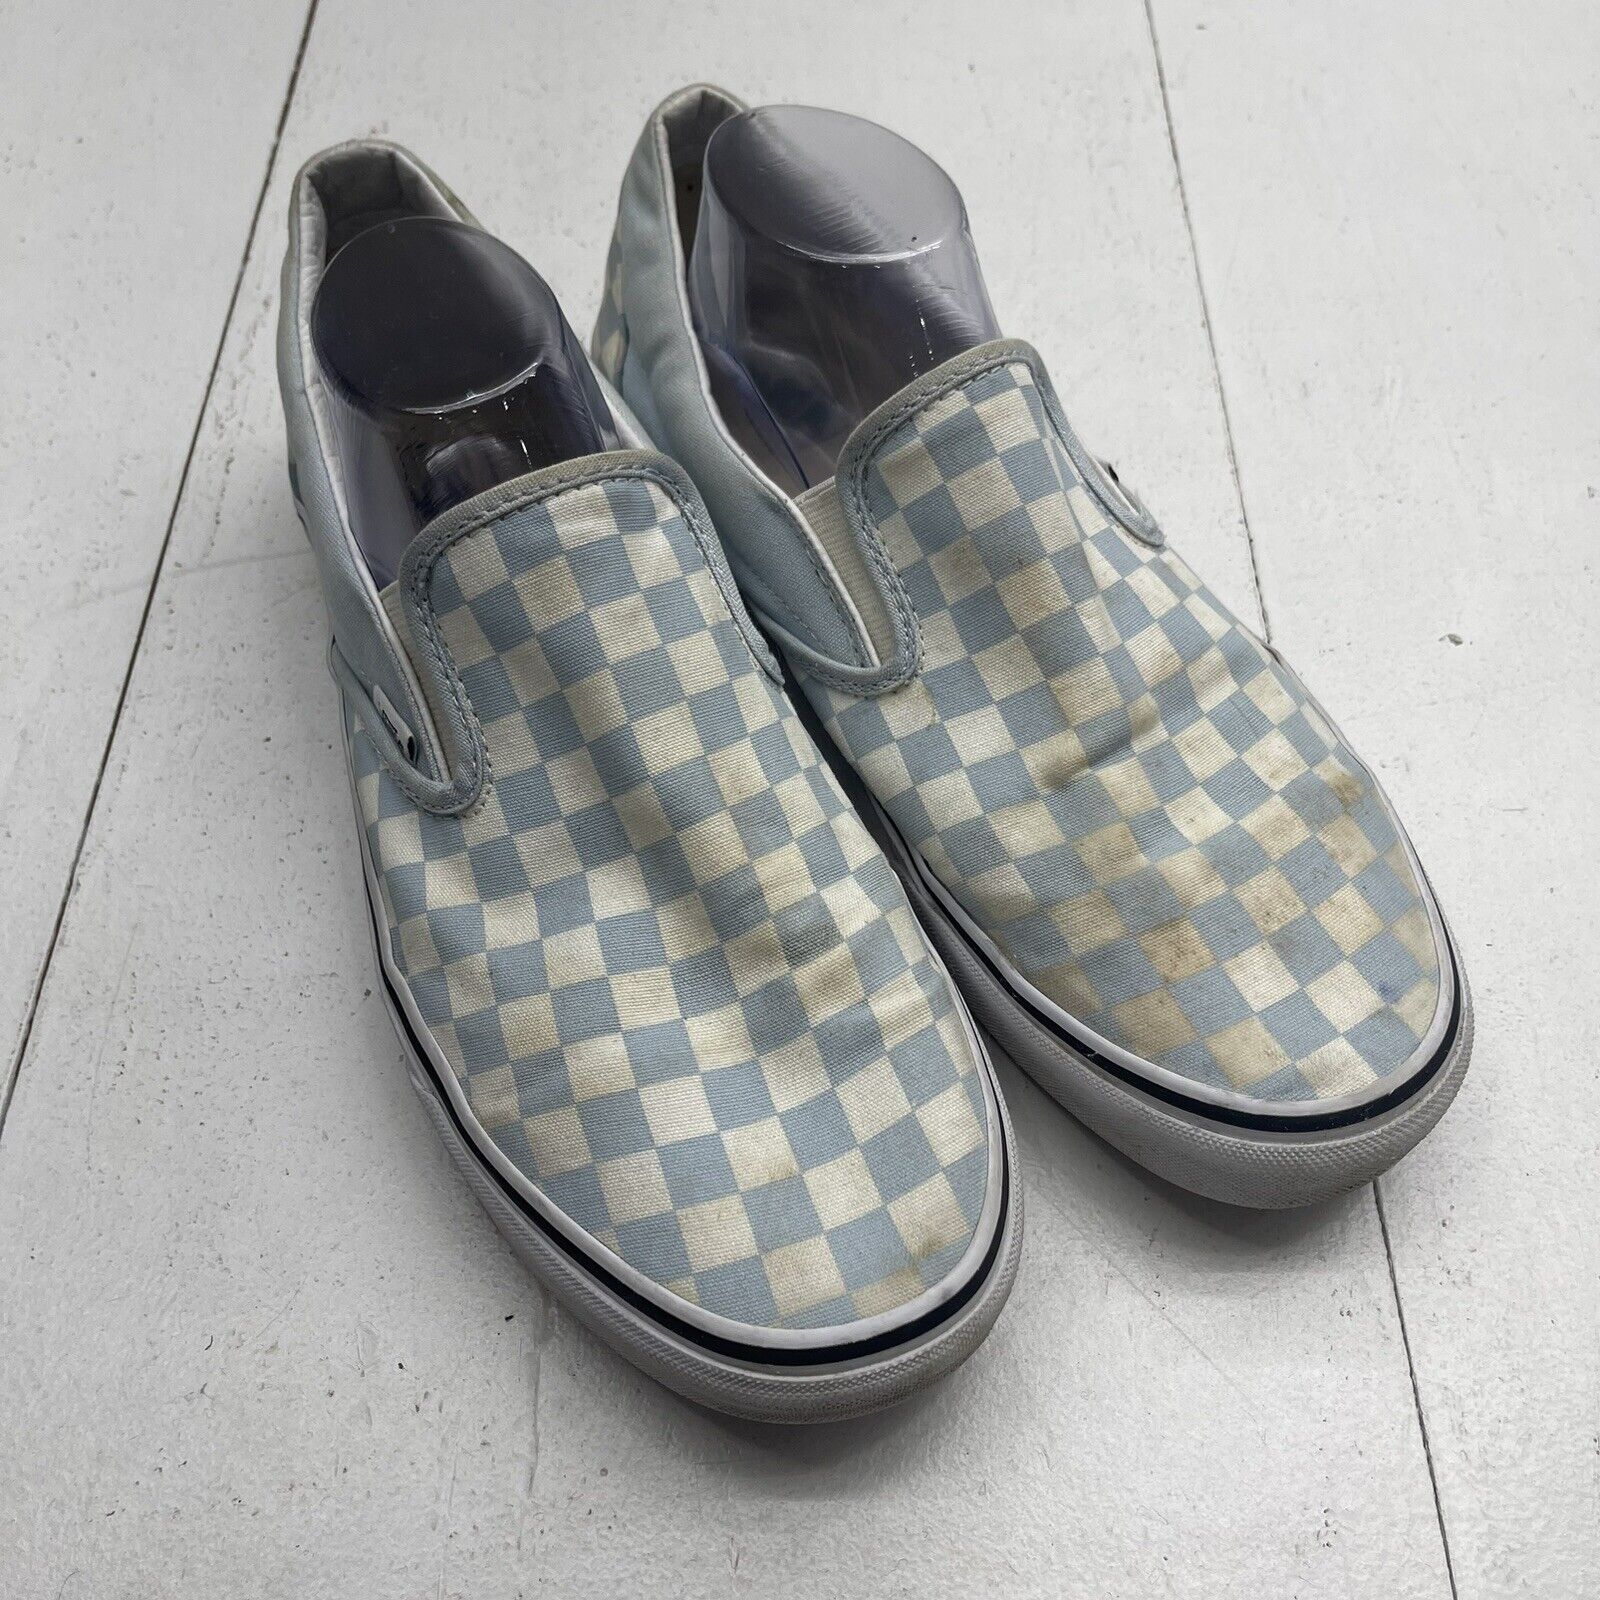 Vans Asher Baby Blue Checkered Slip On Sneakers Mens Size 11.5